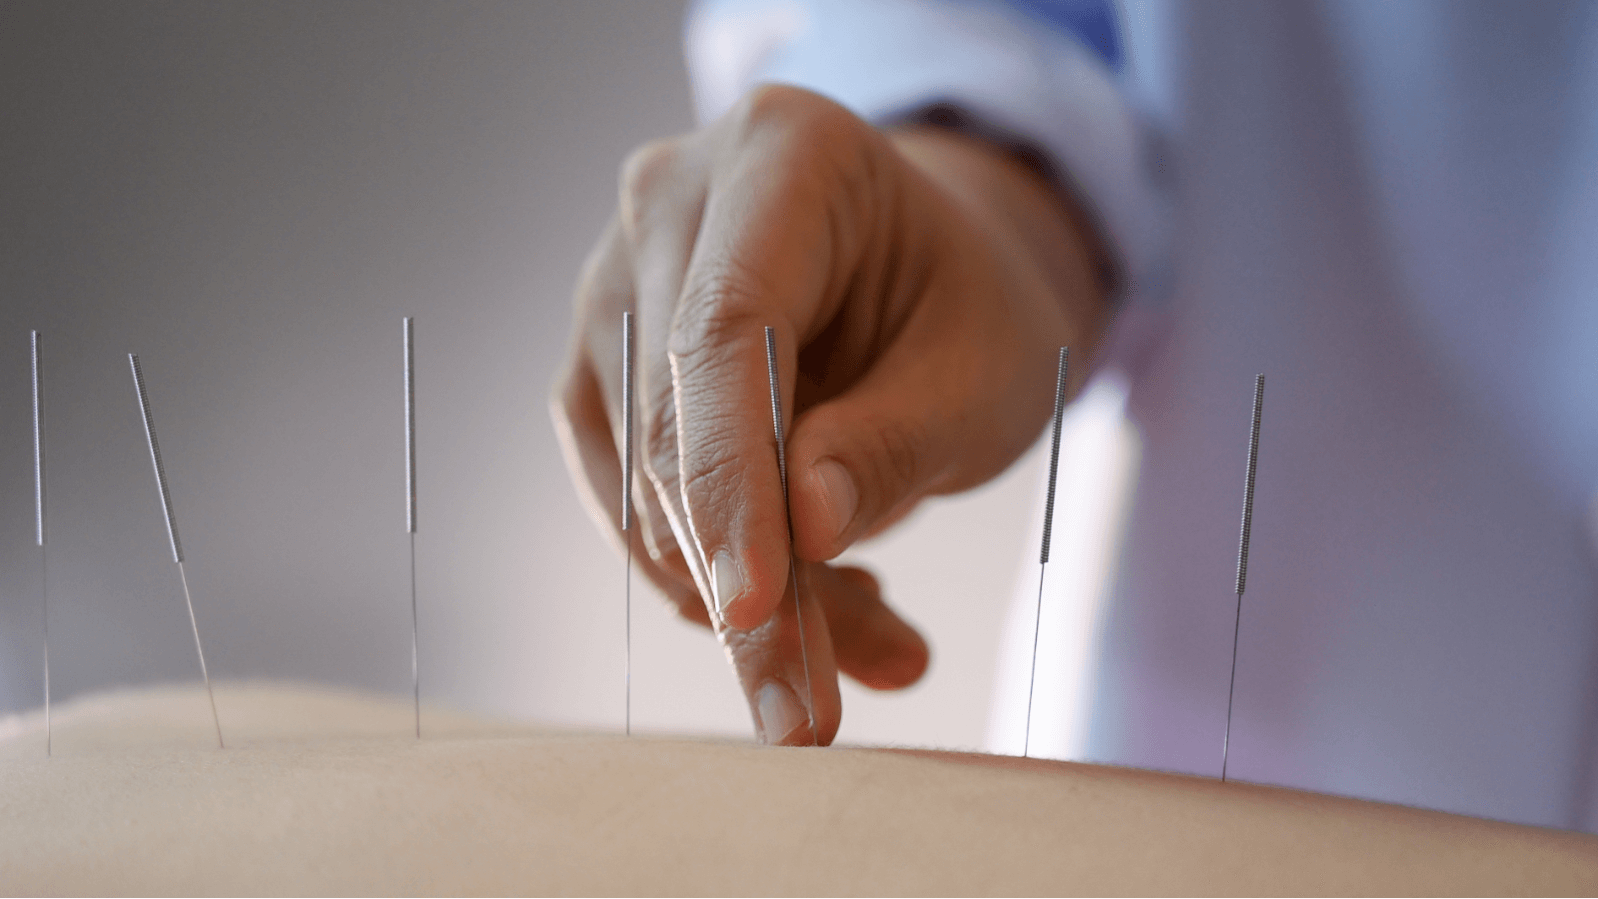 Does Acupuncture Help With Anxiety Problems?